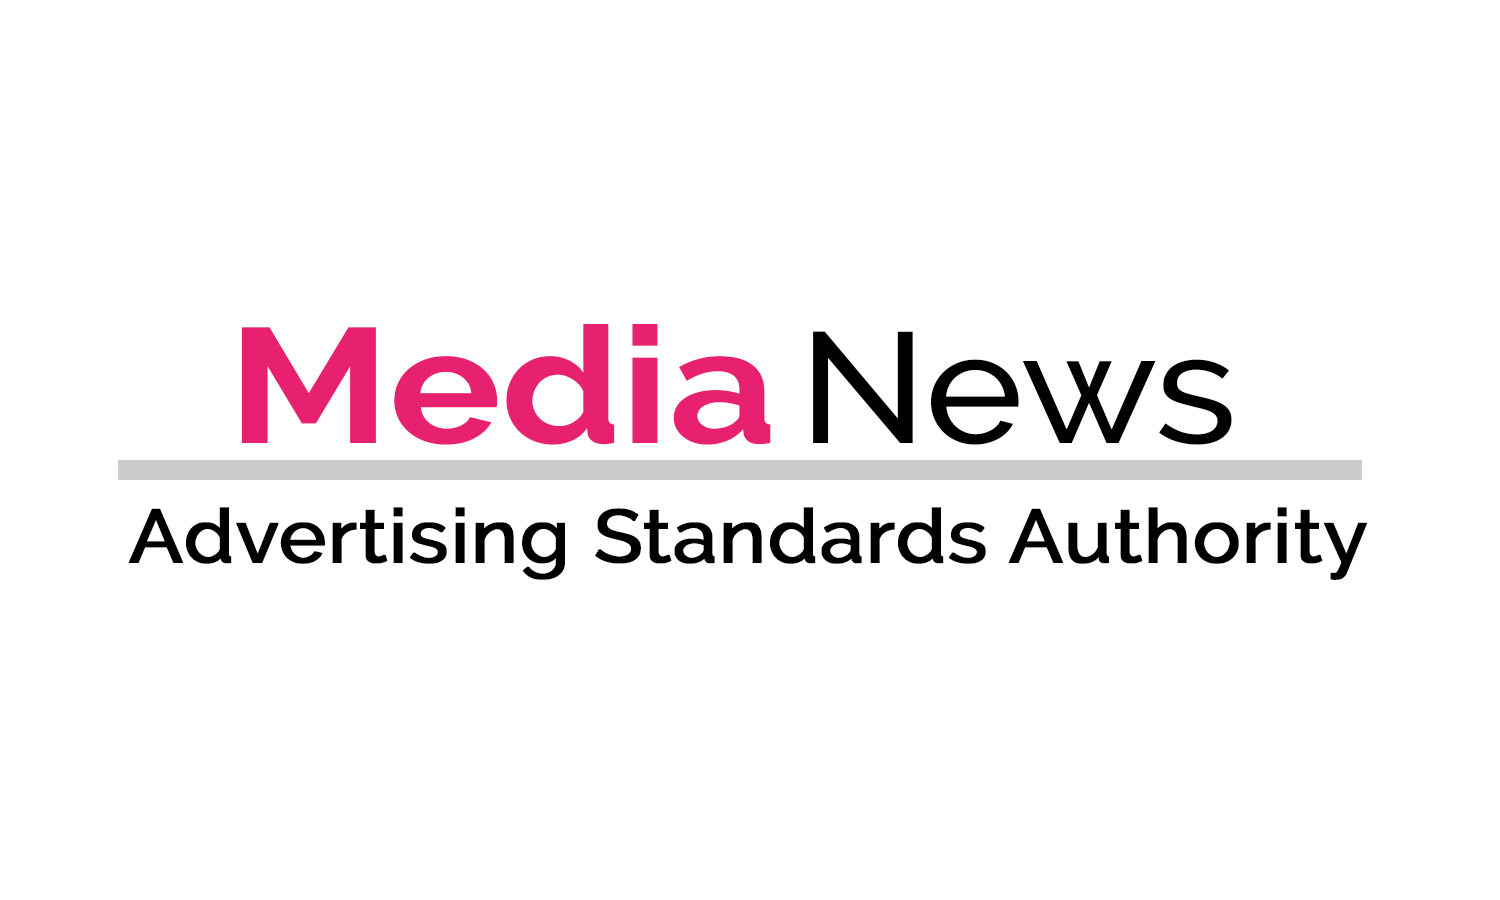 The Advertising Standards Authority influencer marketing guidelines update